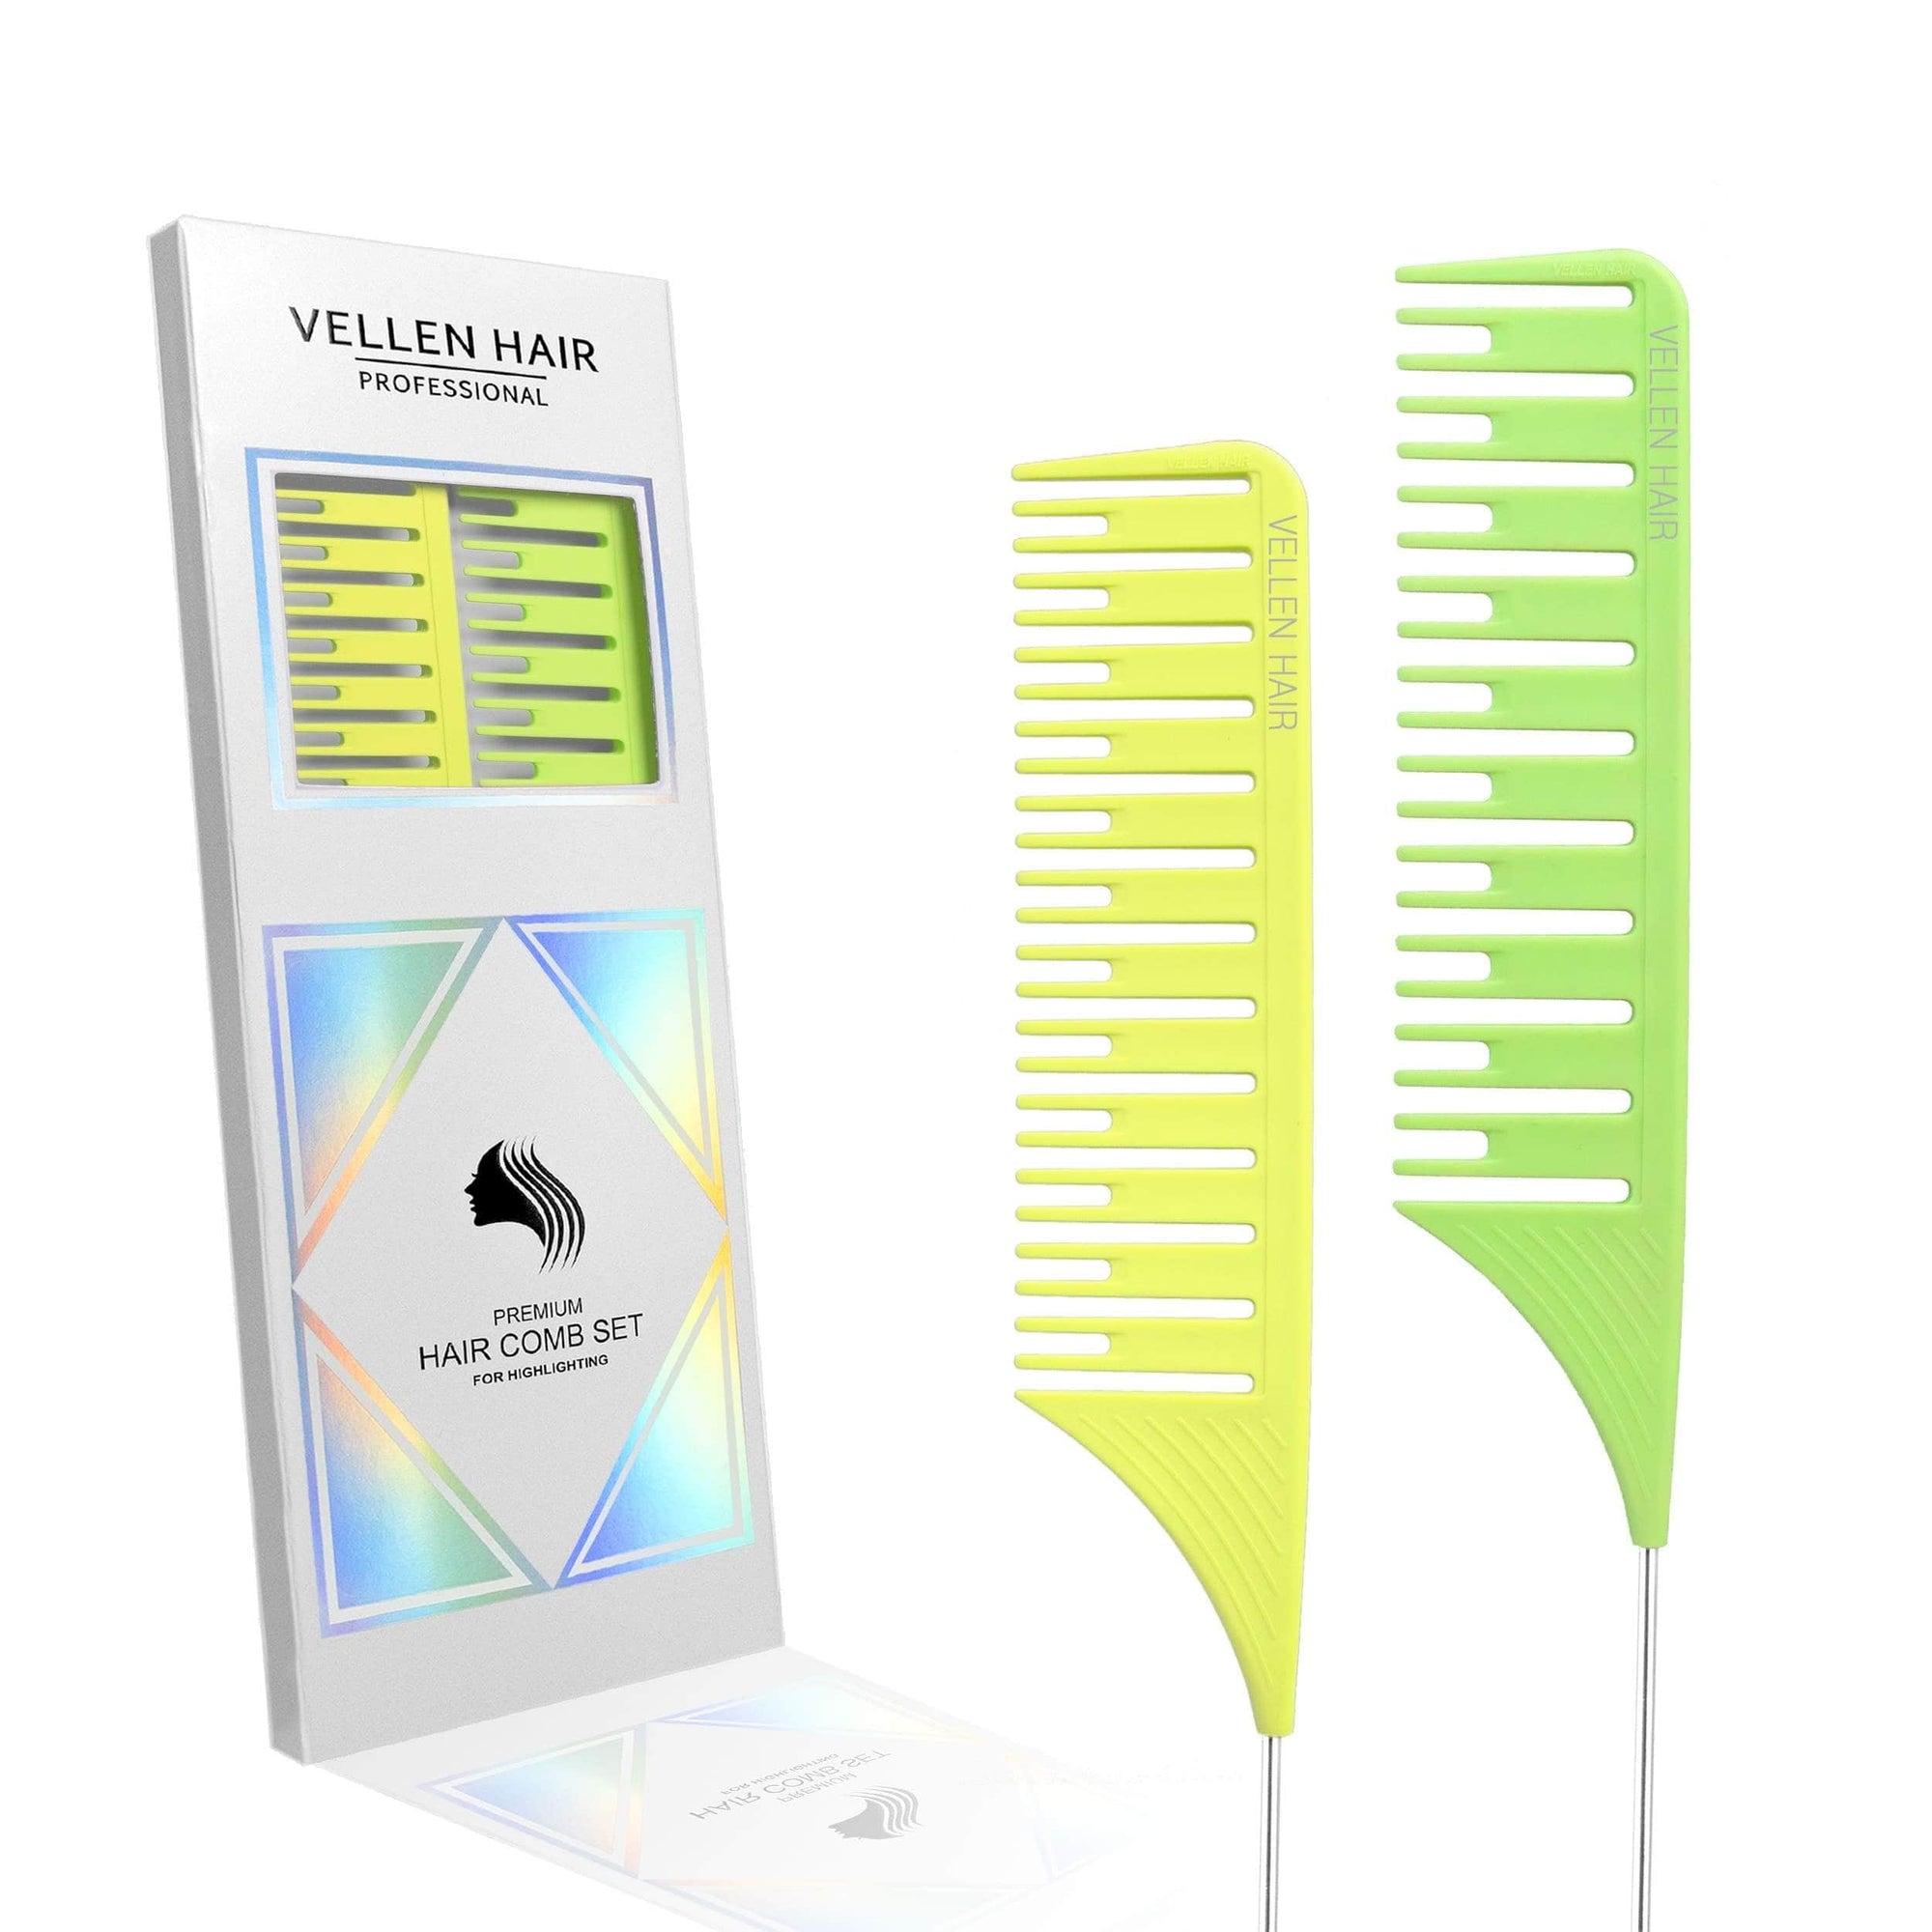 Highlighting Comb 2 Pack Lime/Yellow Accessories - Vellen Hair - Luxe Pacifique